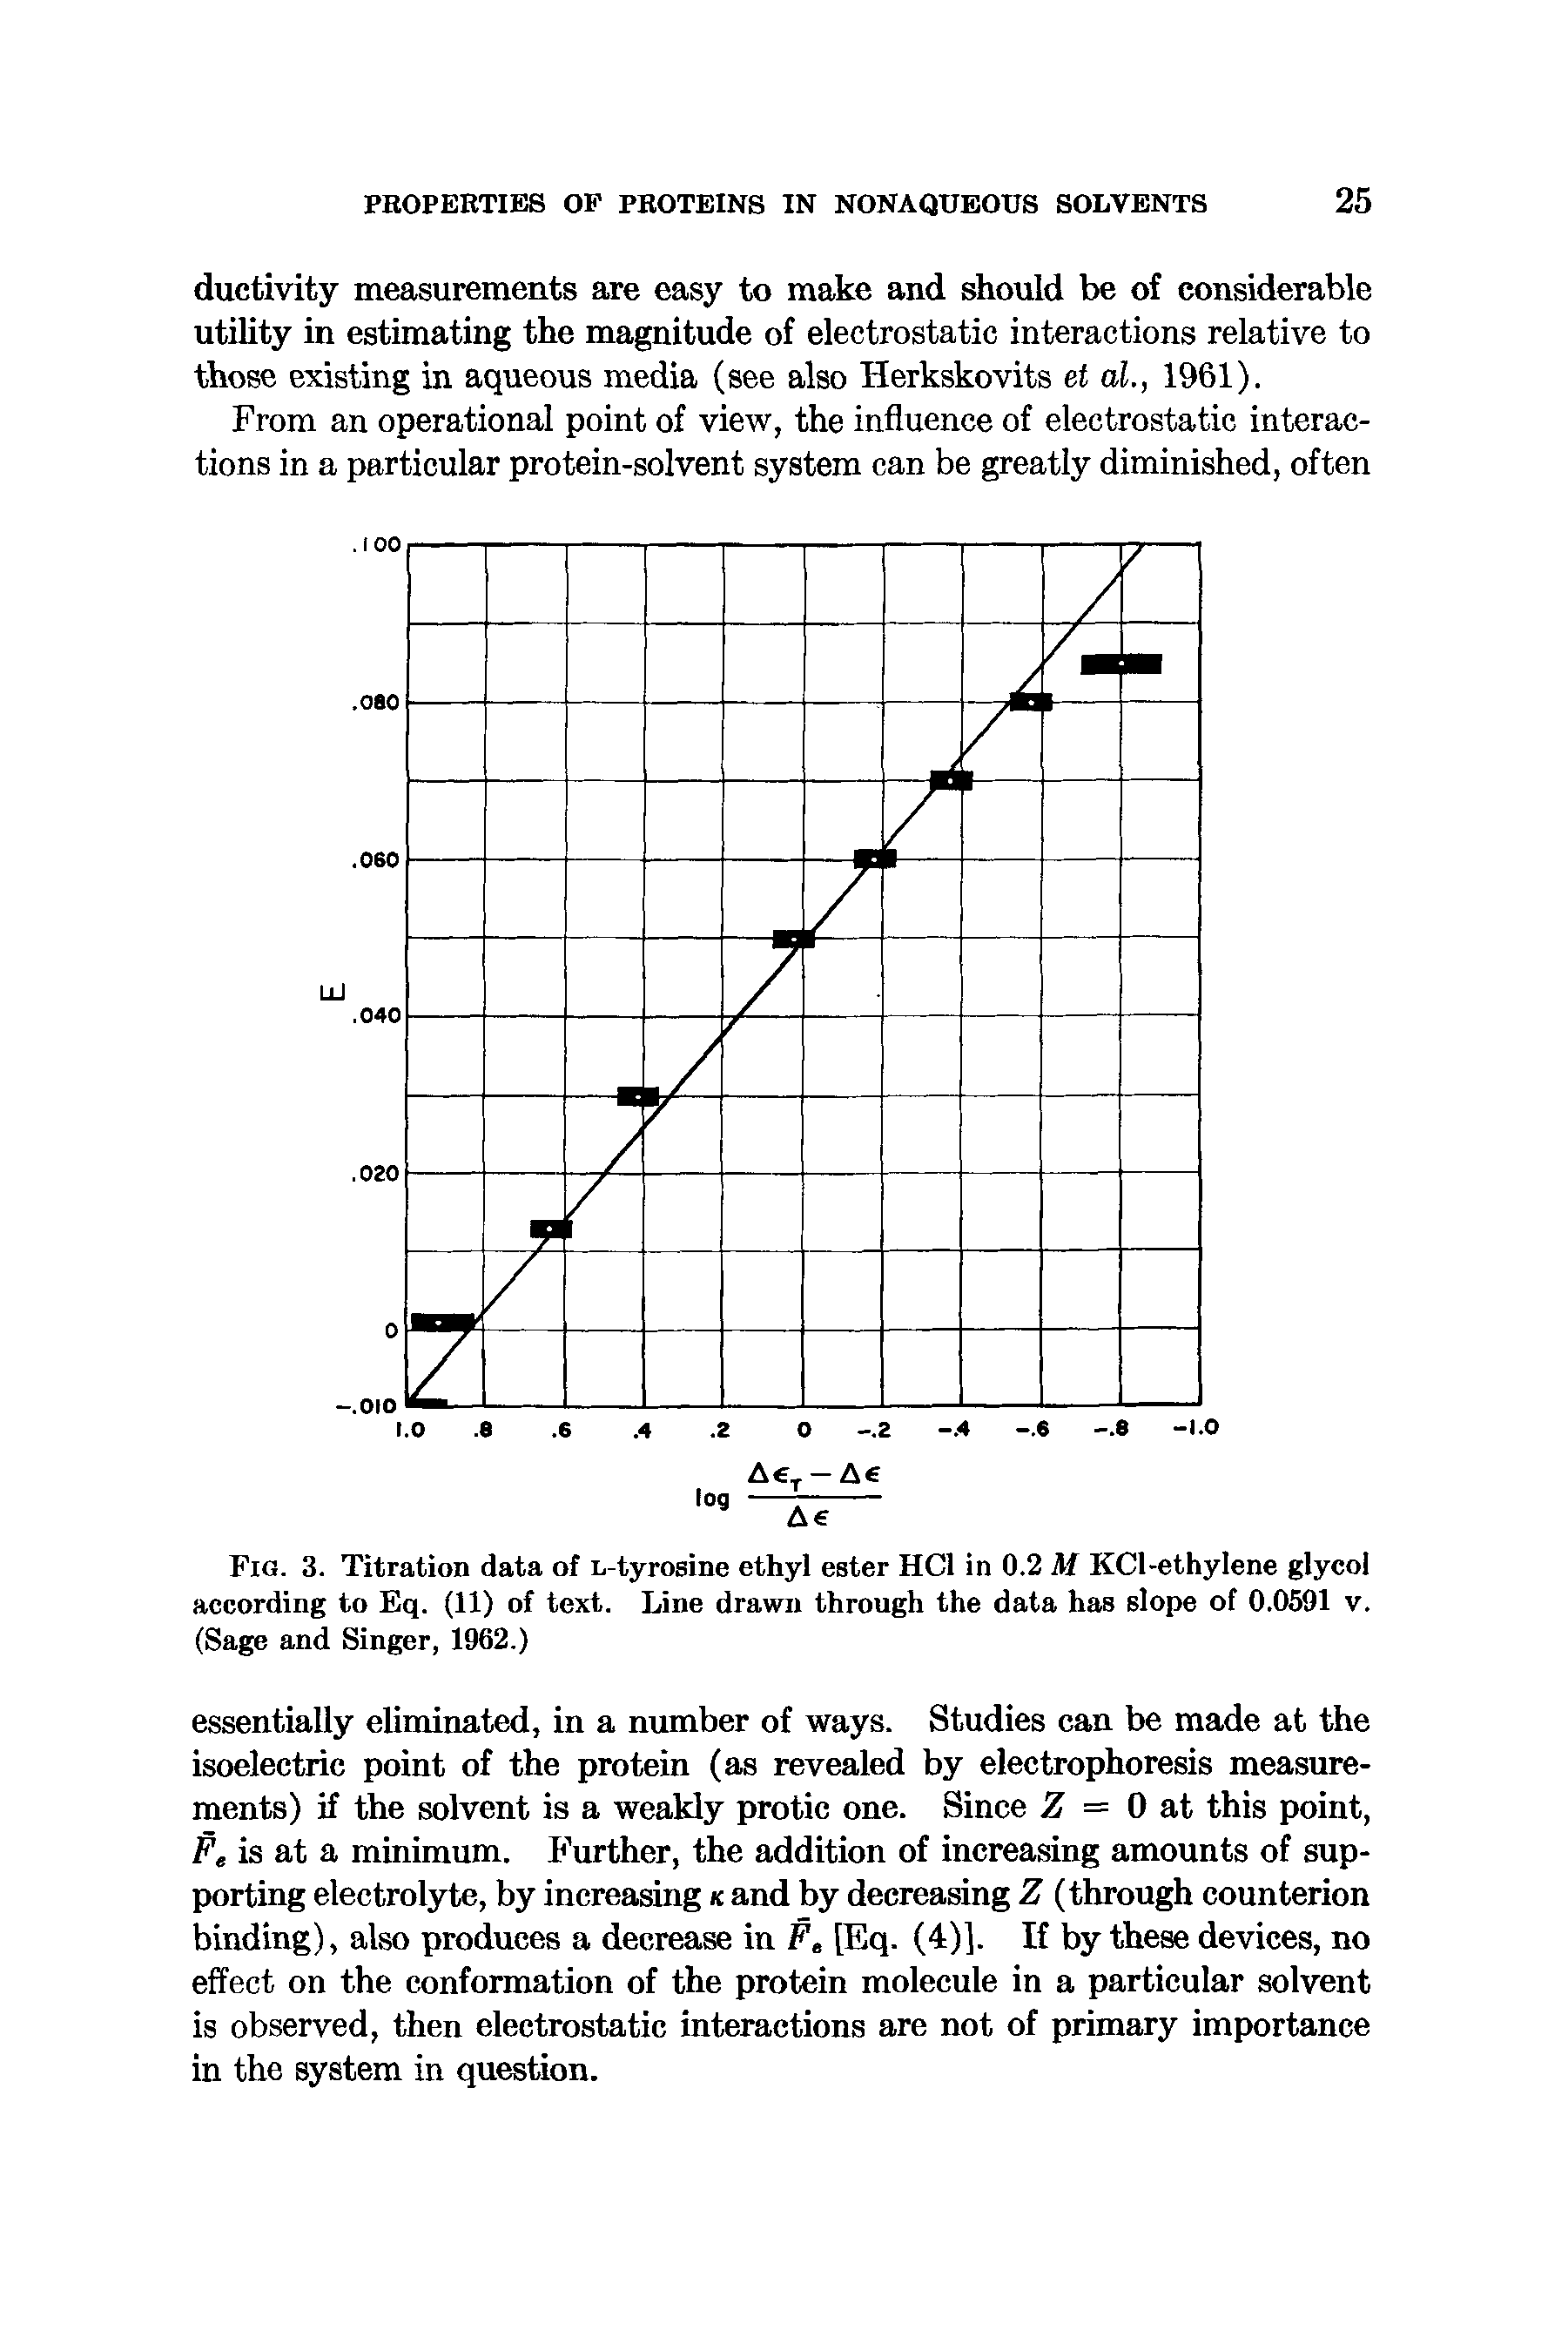 Fig. 3. Titration data of L-tyrosine ethyl ester HCl in 0.2 M KCl-ethylene glycol according to Eq. (11) of text. Line drawn through the data has slope of 0.0591 v. (Sage and Singer, 1962.)...